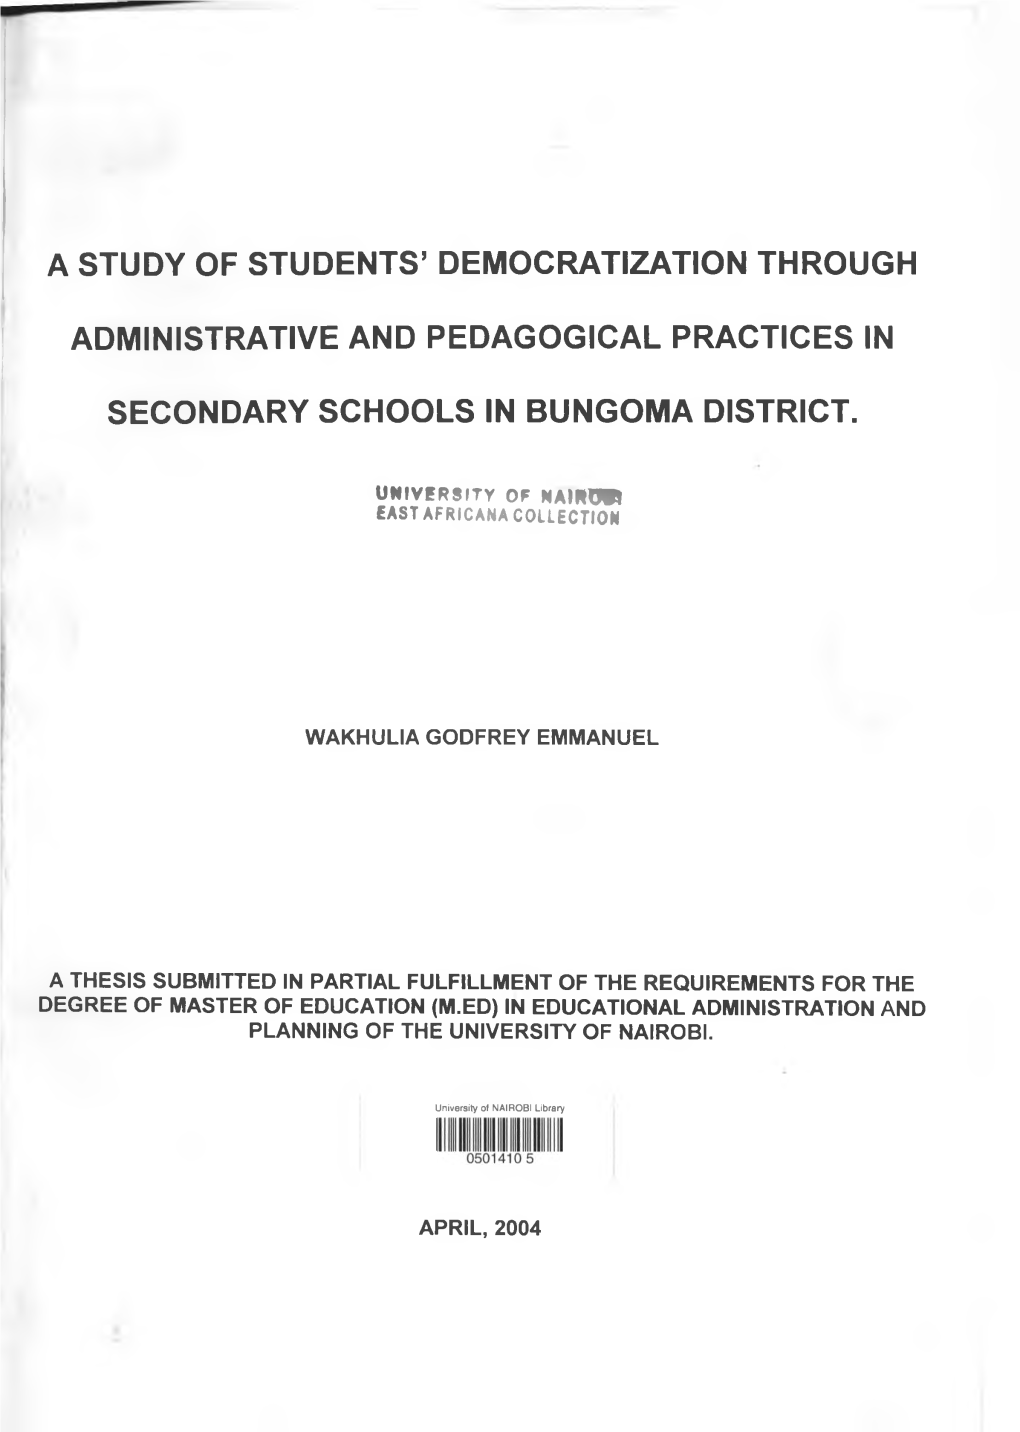 A Study of Students' Democratization Through Administrative And